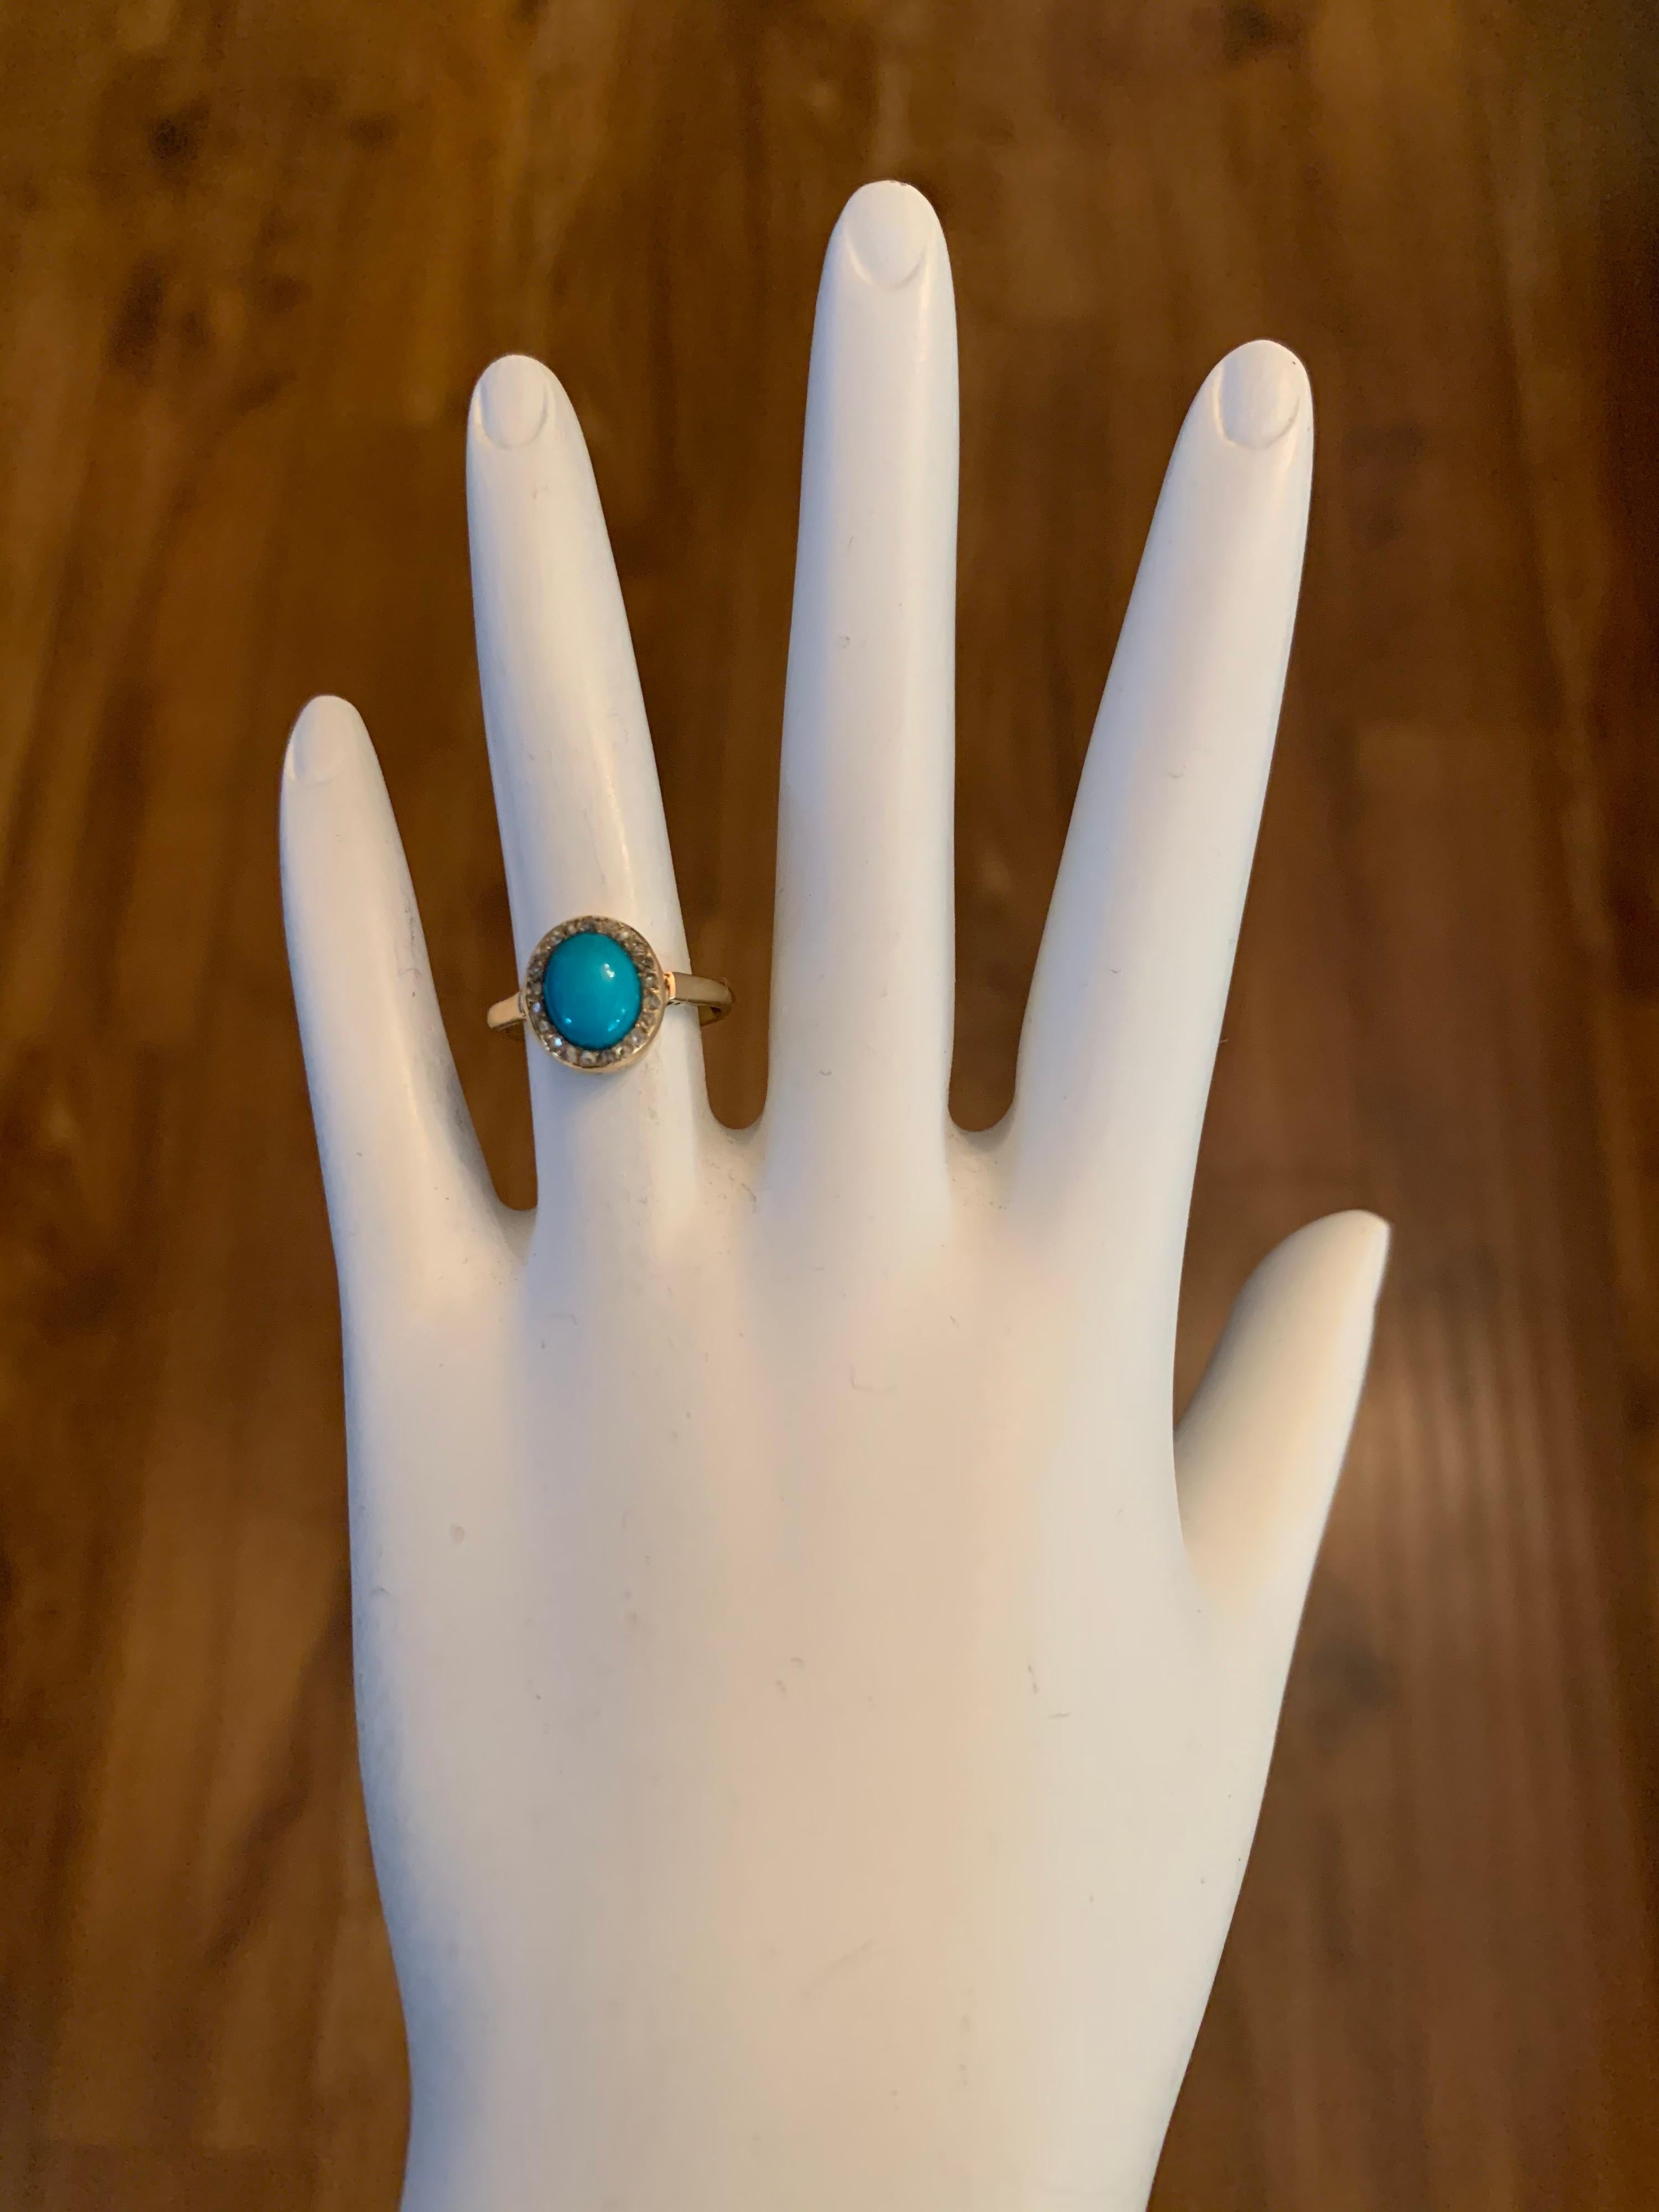 Stunning Mid Century Gold Ring Natural Persian Cabochon (8x6.5mm) Turquoise & 21 Natural Old Mine Diamonds Circa 1950. The ring weighs 2.7 grams and is a size 4.75+.